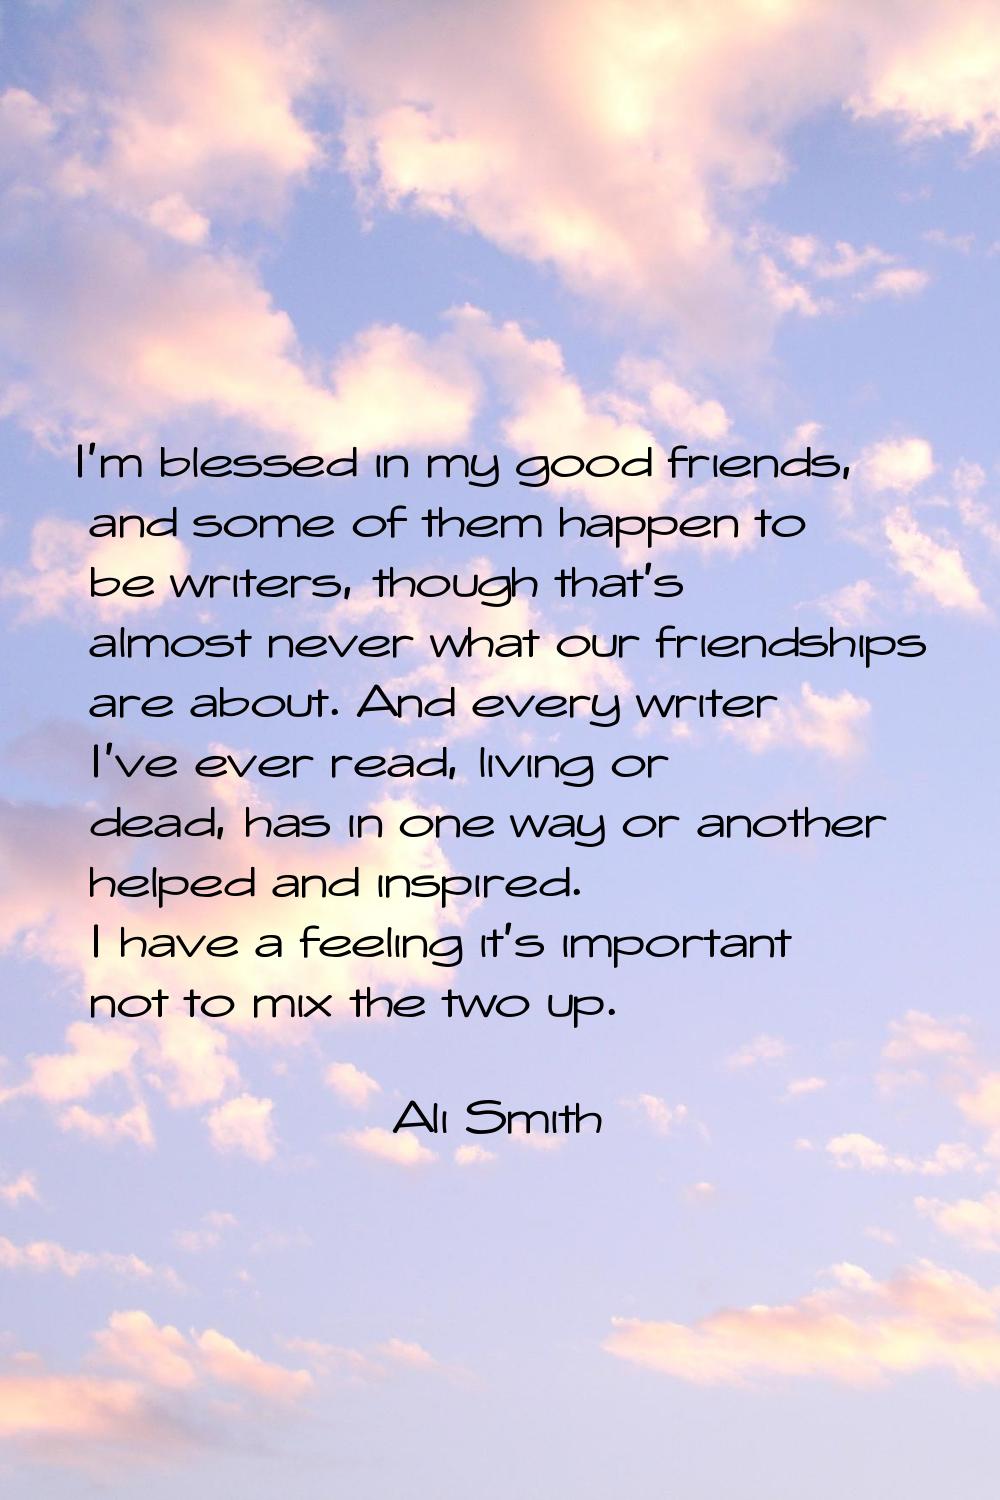 I'm blessed in my good friends, and some of them happen to be writers, though that's almost never w